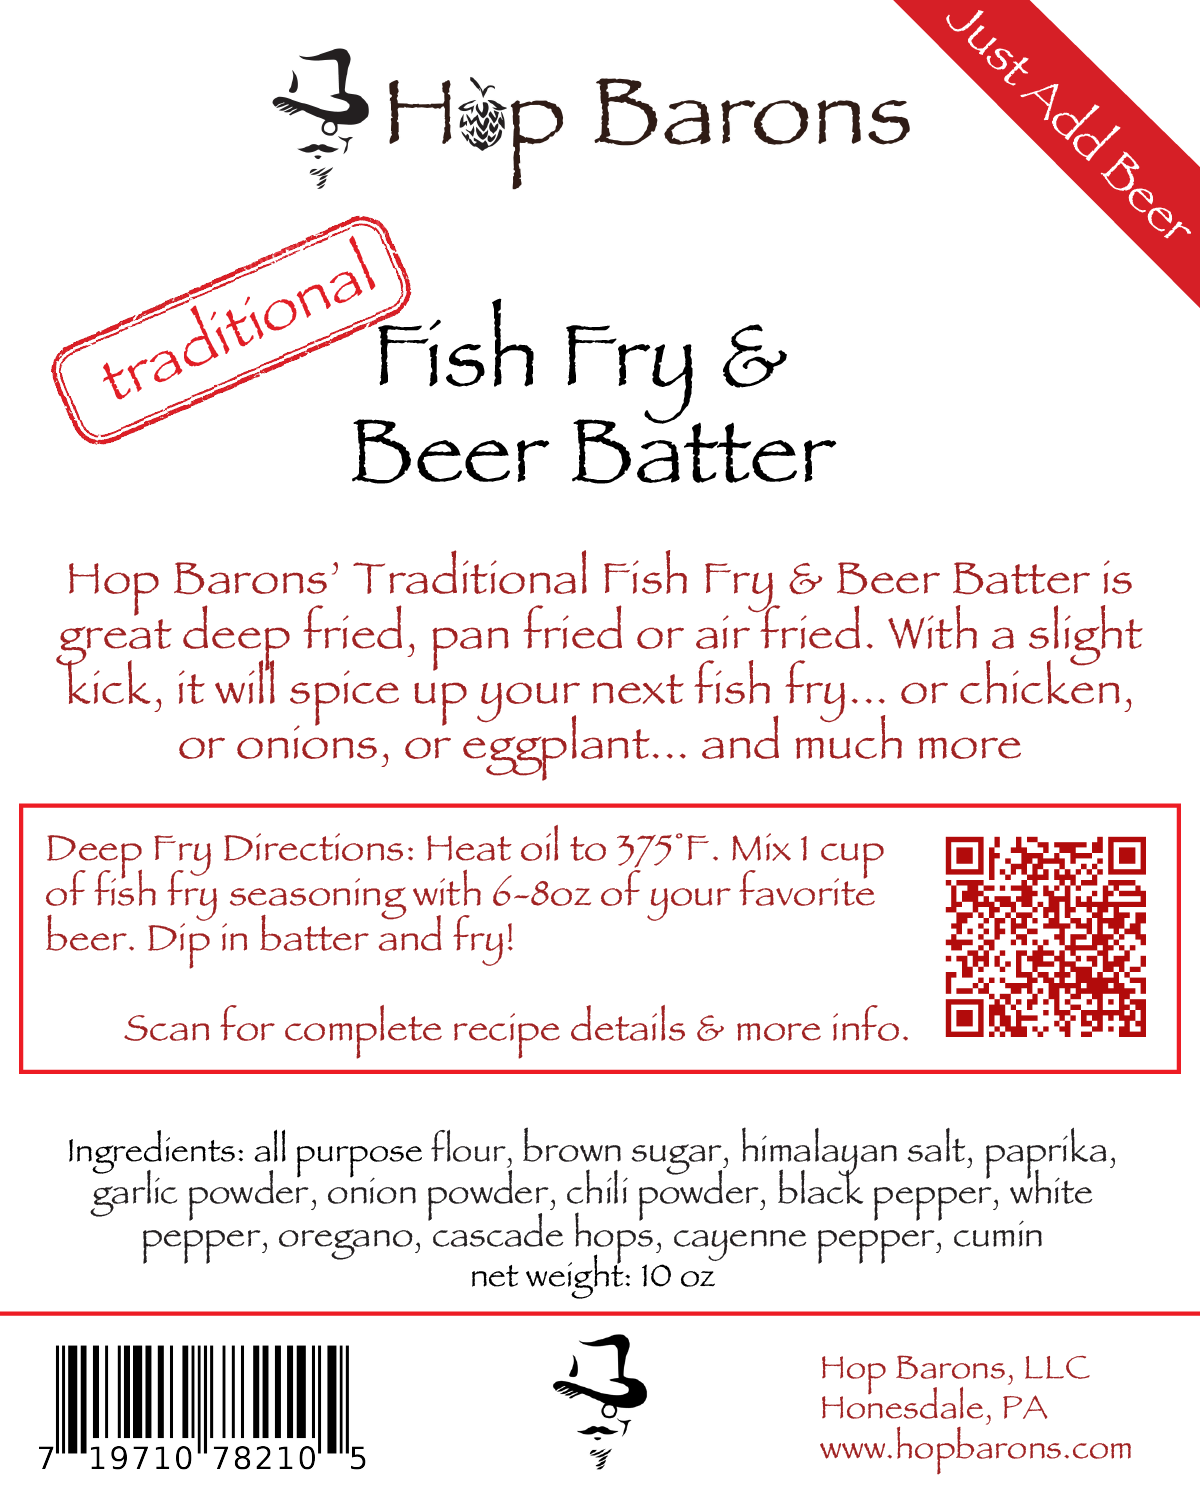 Fish Fry & Beer Batter: A Culinary Masterpiece for Seafood Delights!